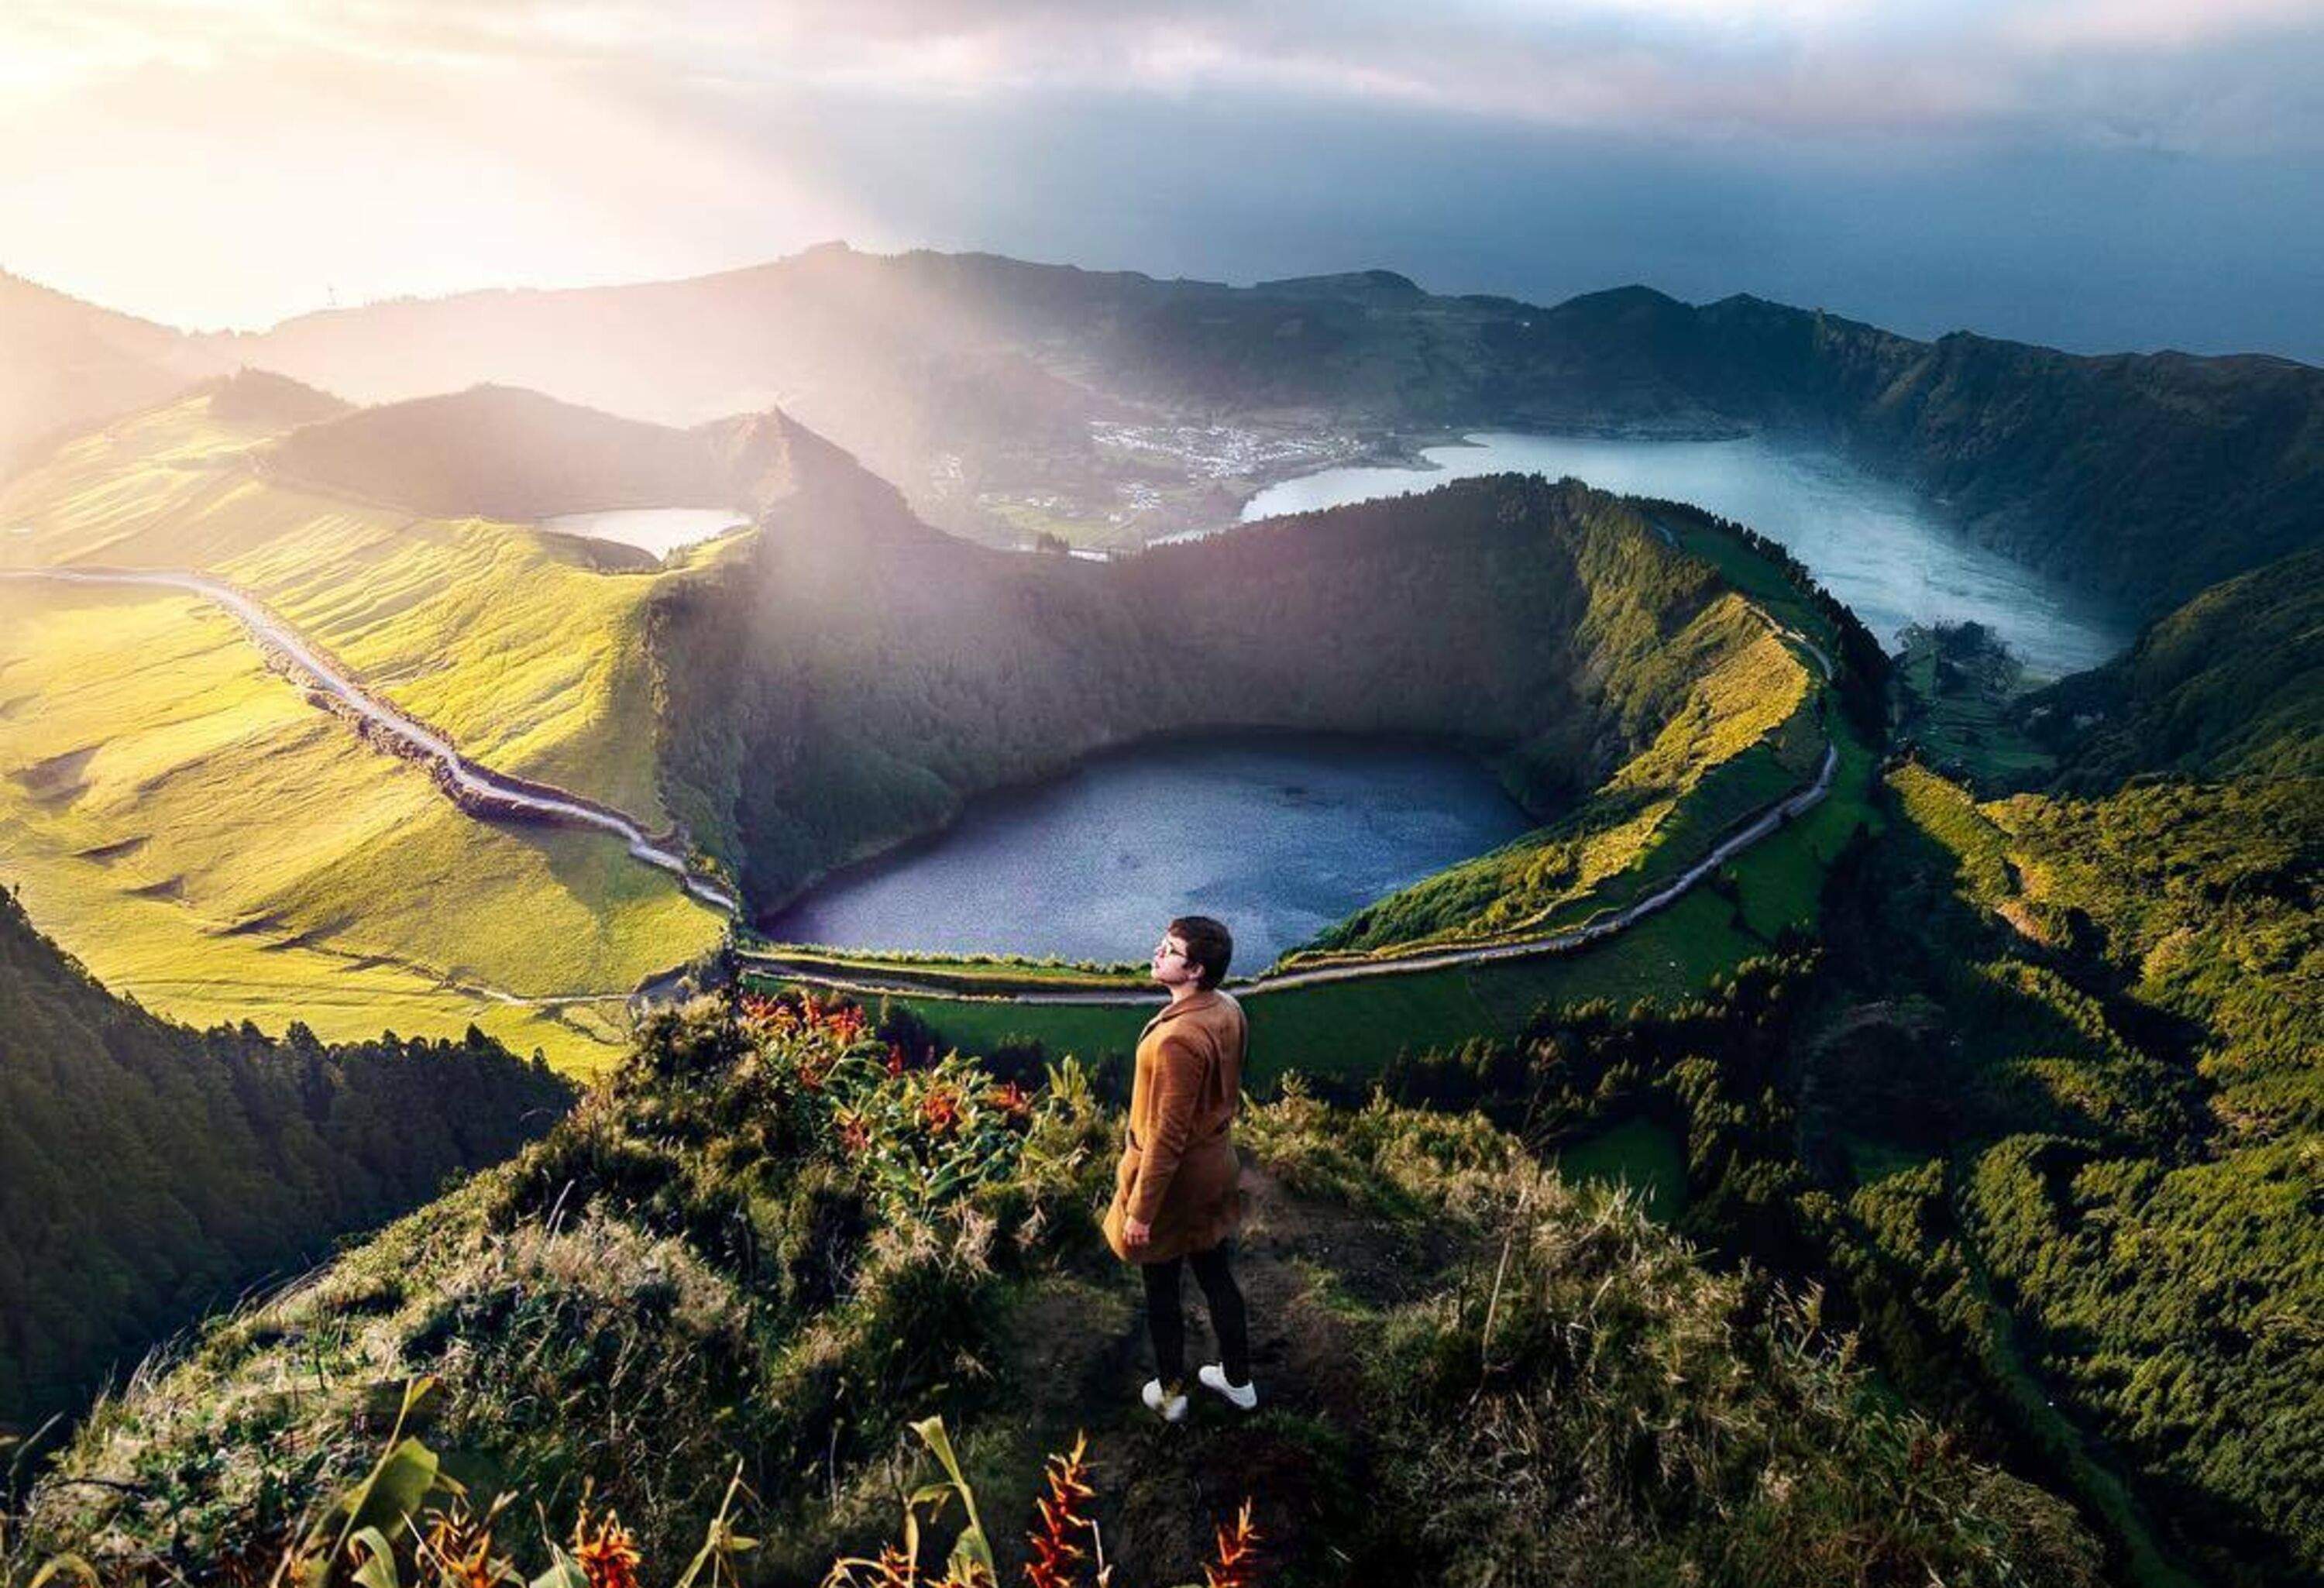 A male tourist stands tall on top of a lush mountain overlooking the spectacular crater lakes against the scenic sky.